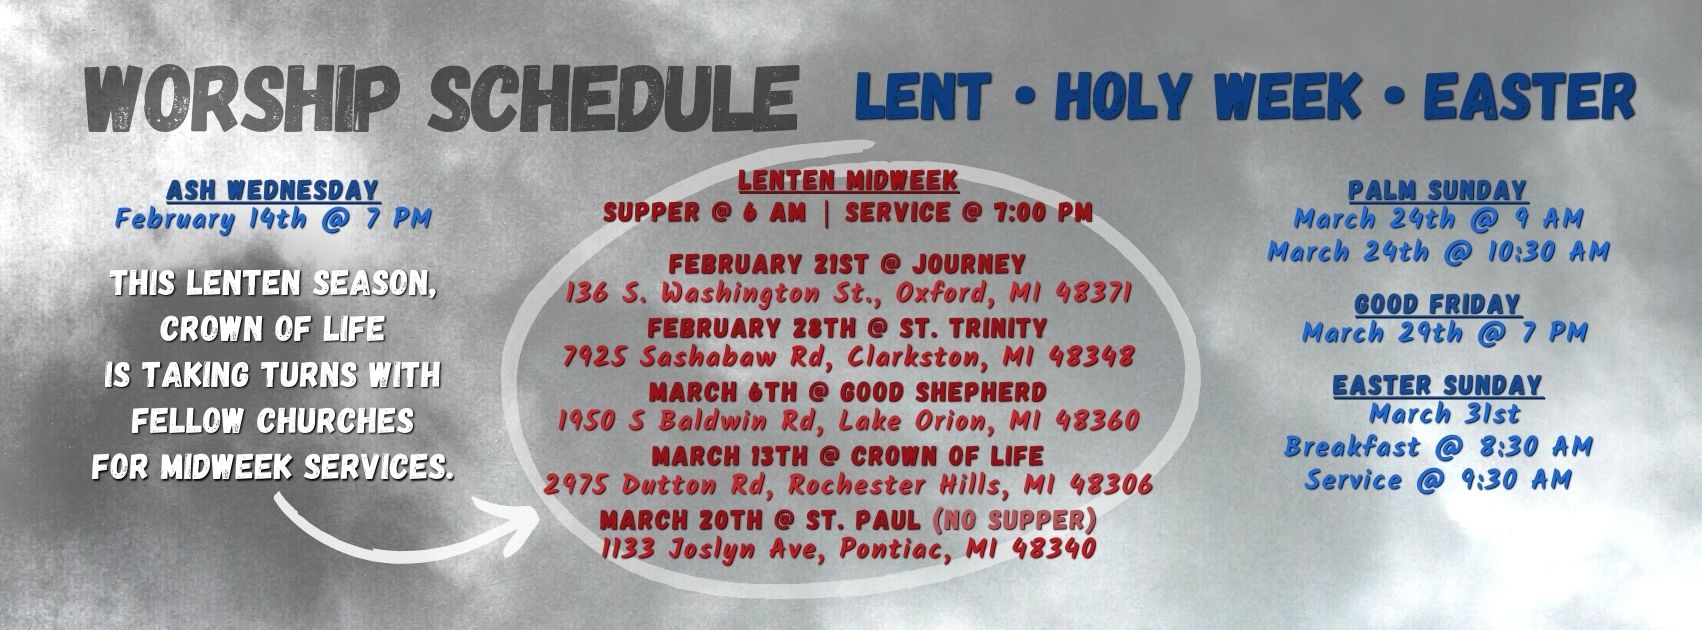 2024.Lent.Holy.Week.Easter.Worship.Schedule.1702x630